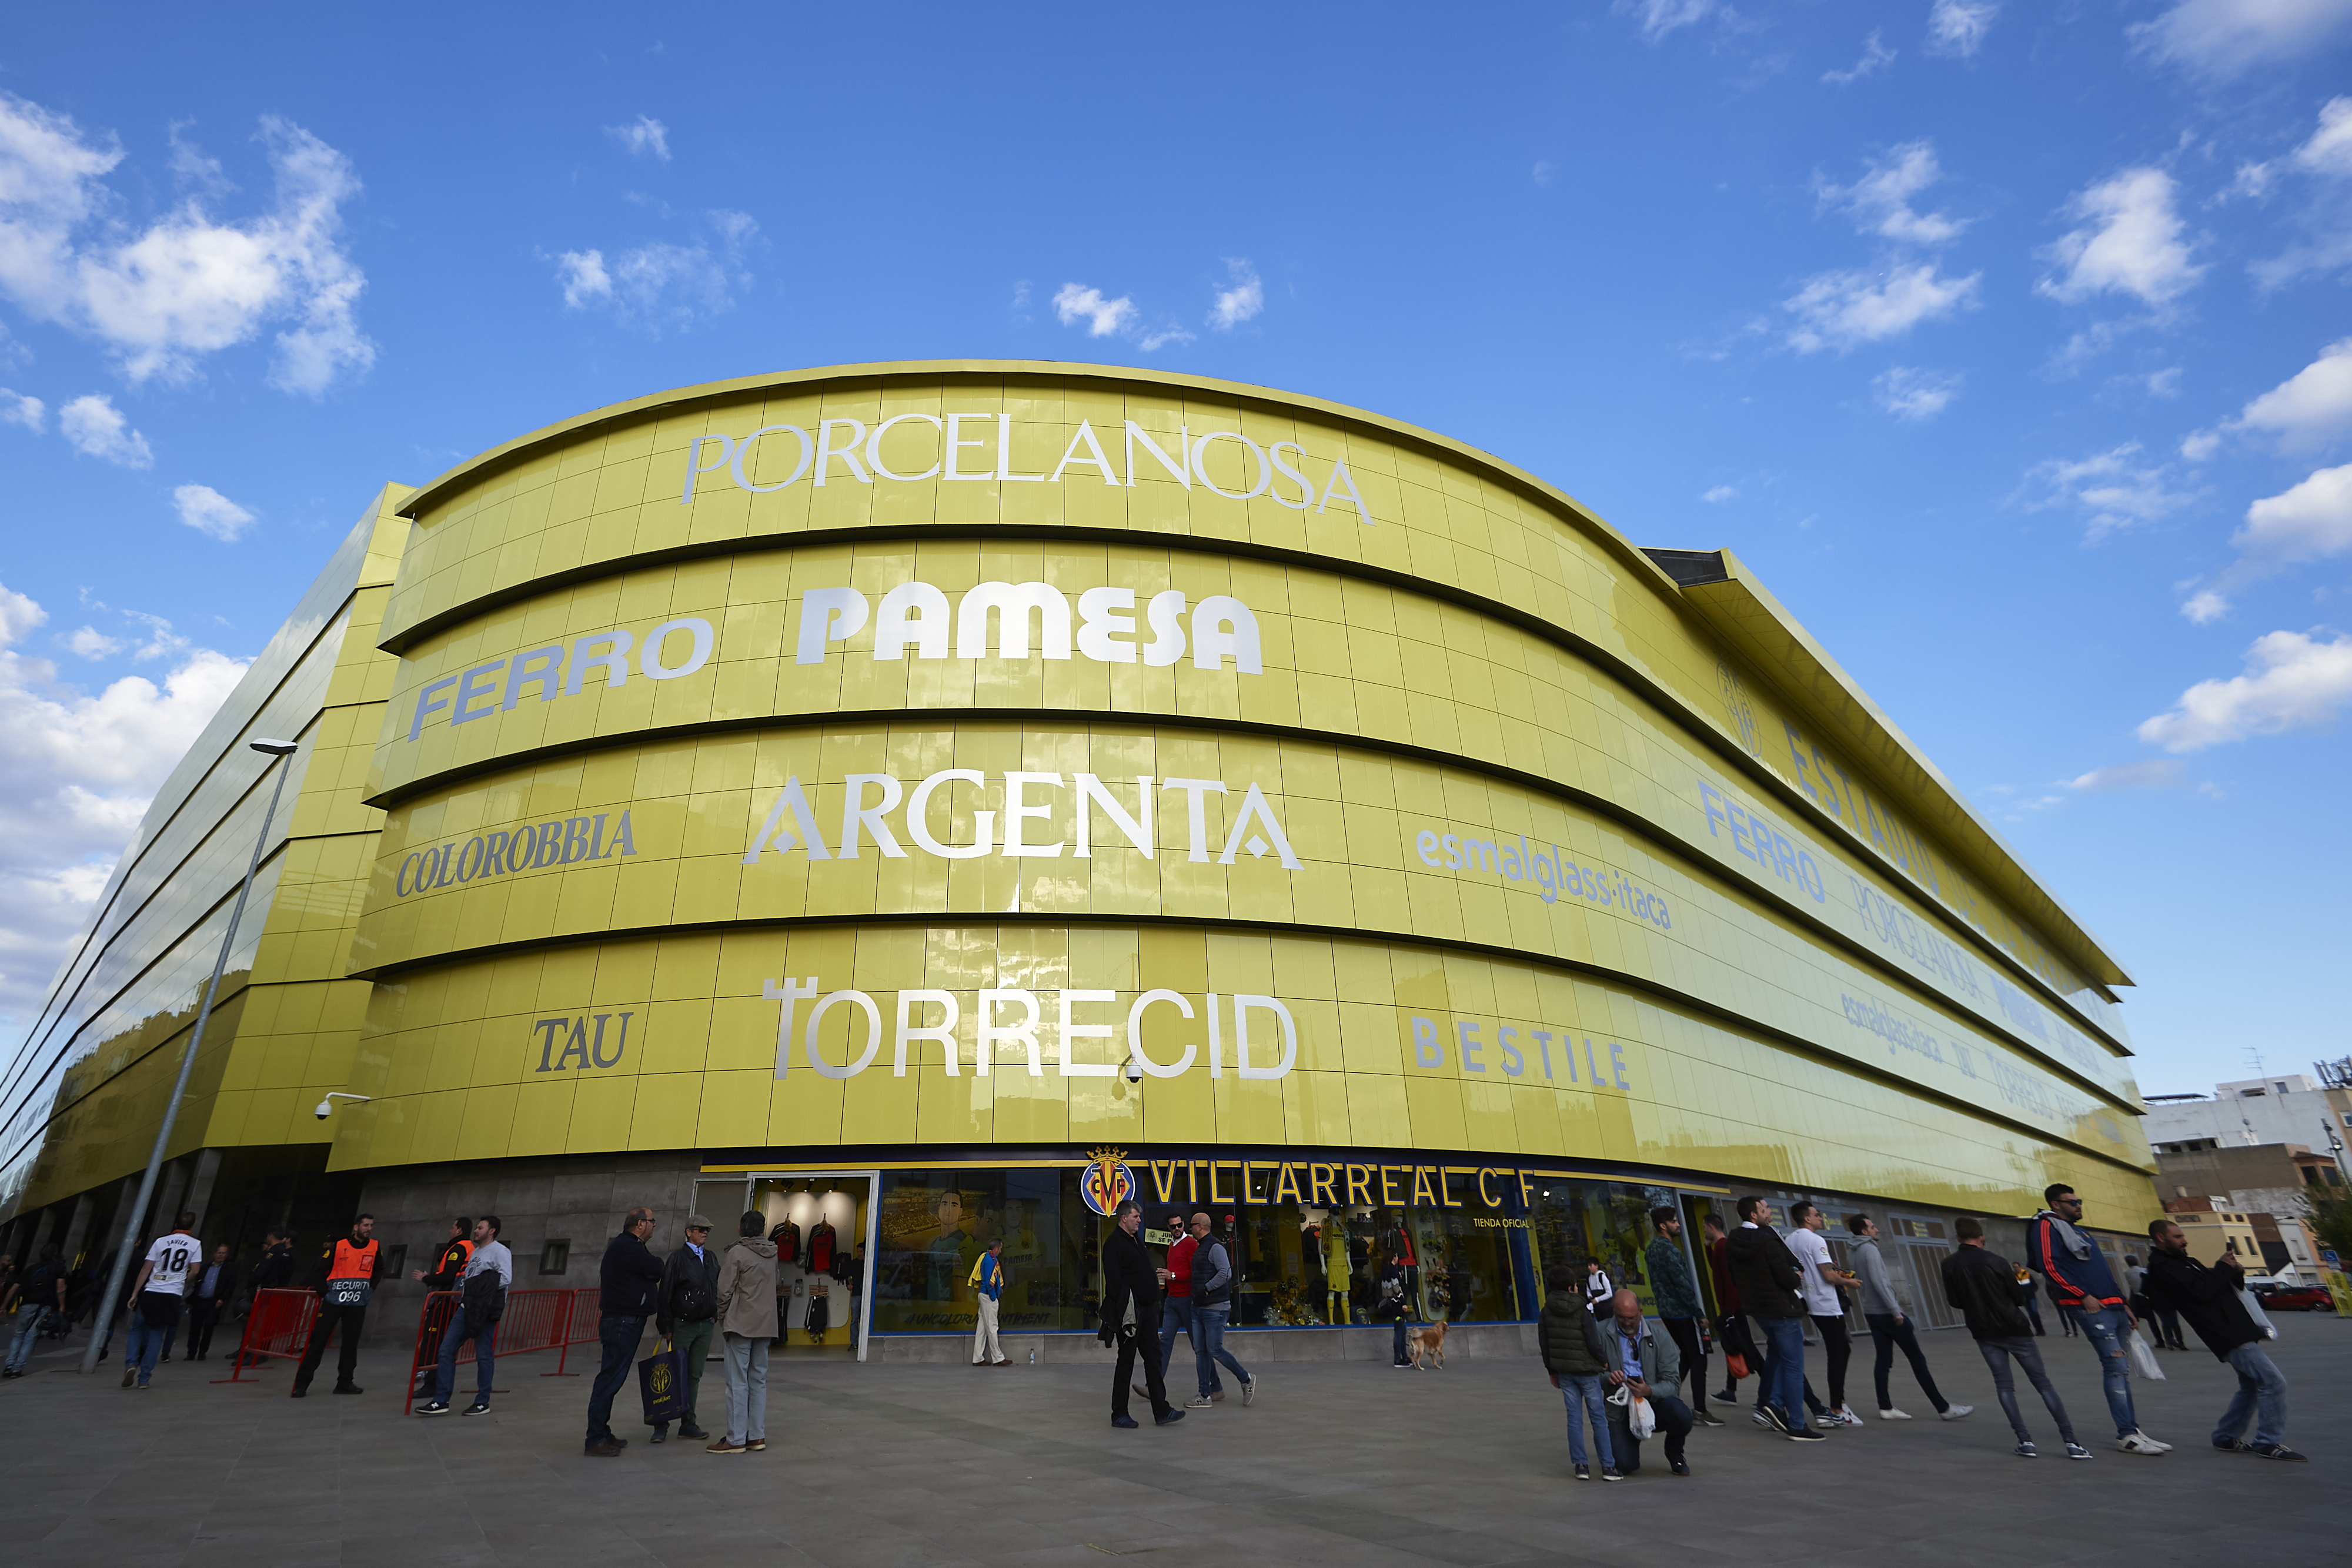 VILLAREAL, SPAIN - APRIL 11: General view outside the stadium prior to the the UEFA Europa League Quarter Final First Leg match between Villarreal and Valencia at Estadio de la Ceramica on April 11, 2019 in Villareal, Spain. (Photo by Fotopress/Getty Images)